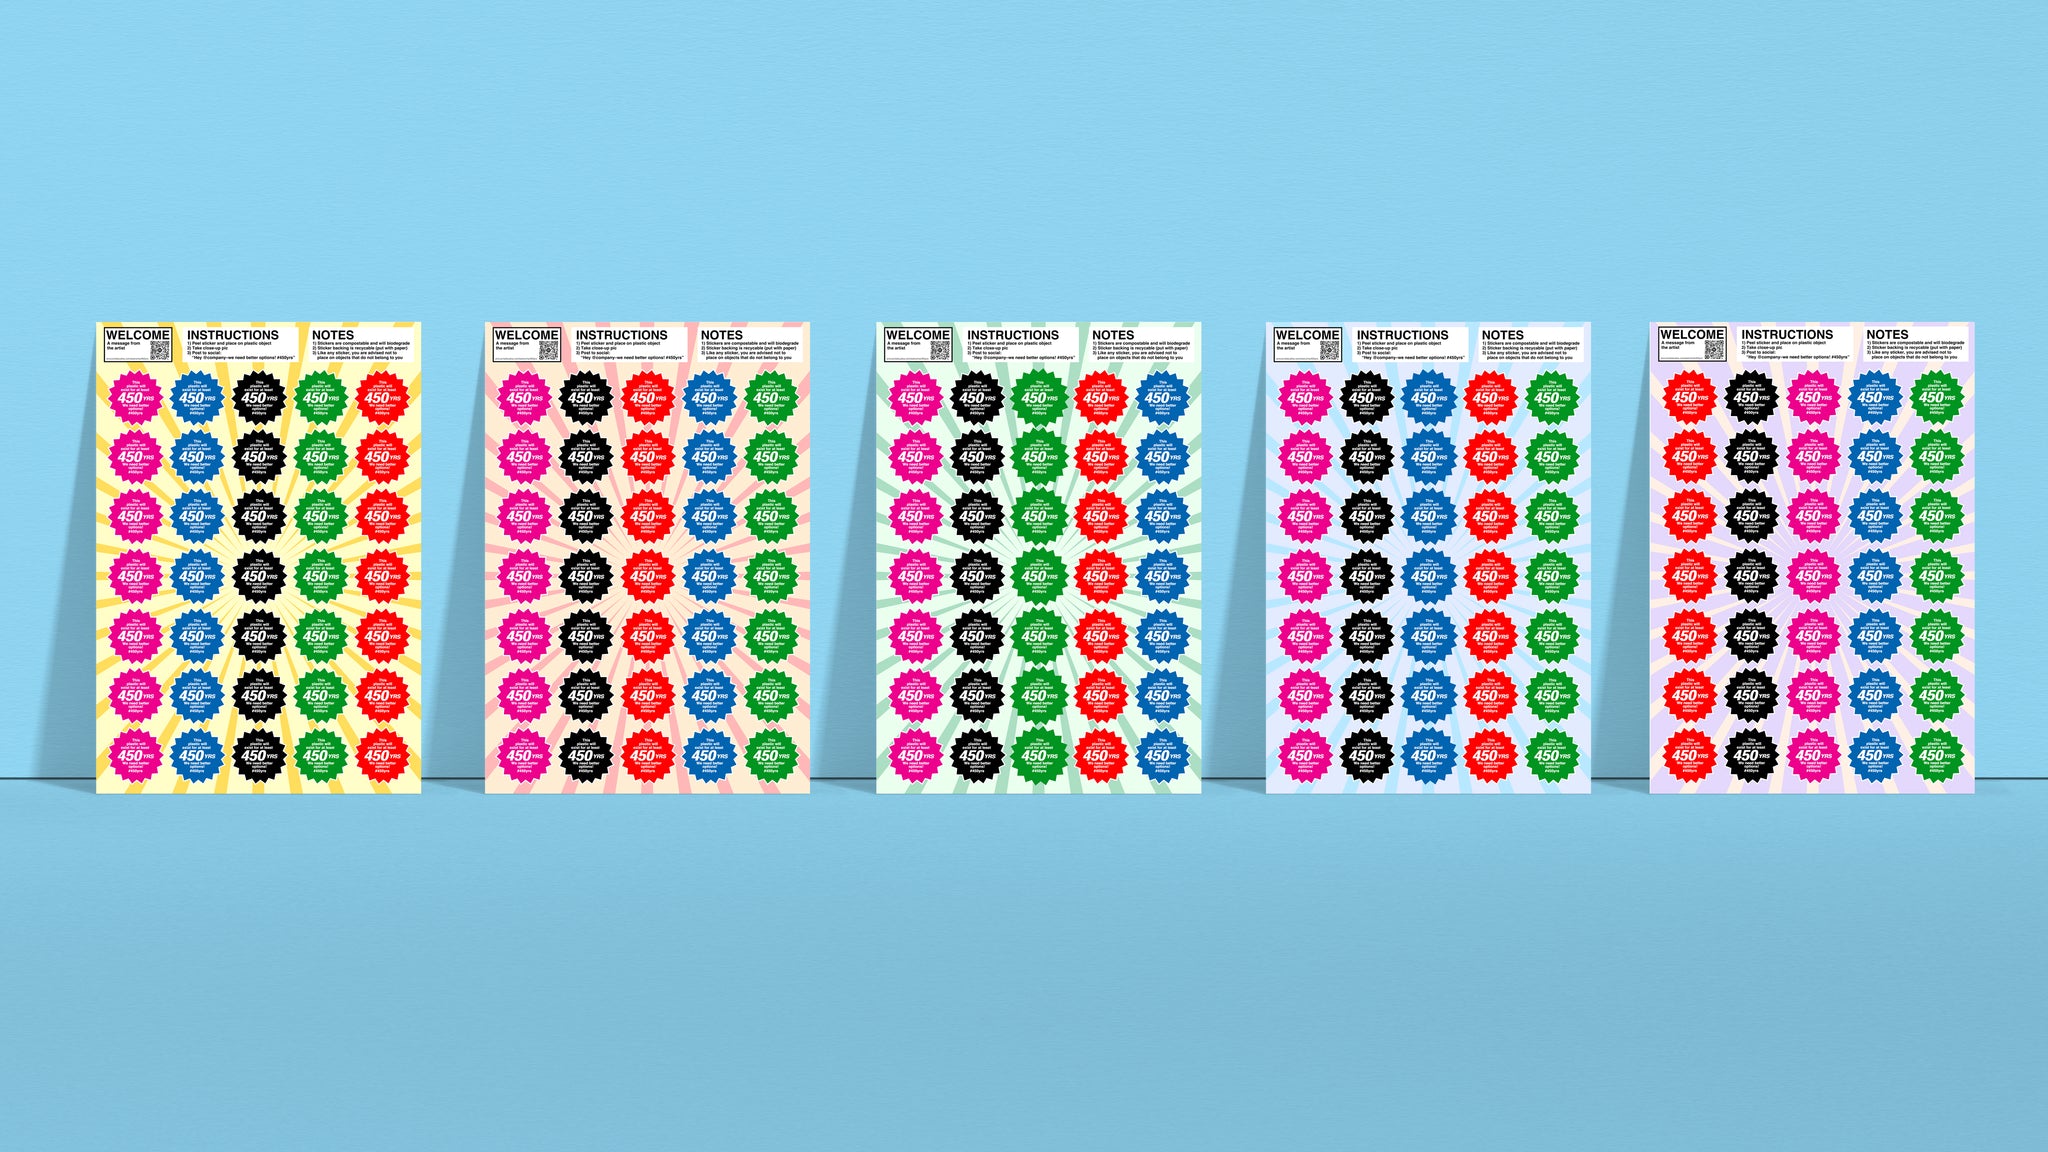 Photograph showing five 8.5 inch by 12.25 inch sticker sheets side by side with different color backgrounds. Each sheet contains 35, multi-colored, starburst-shaped stickers